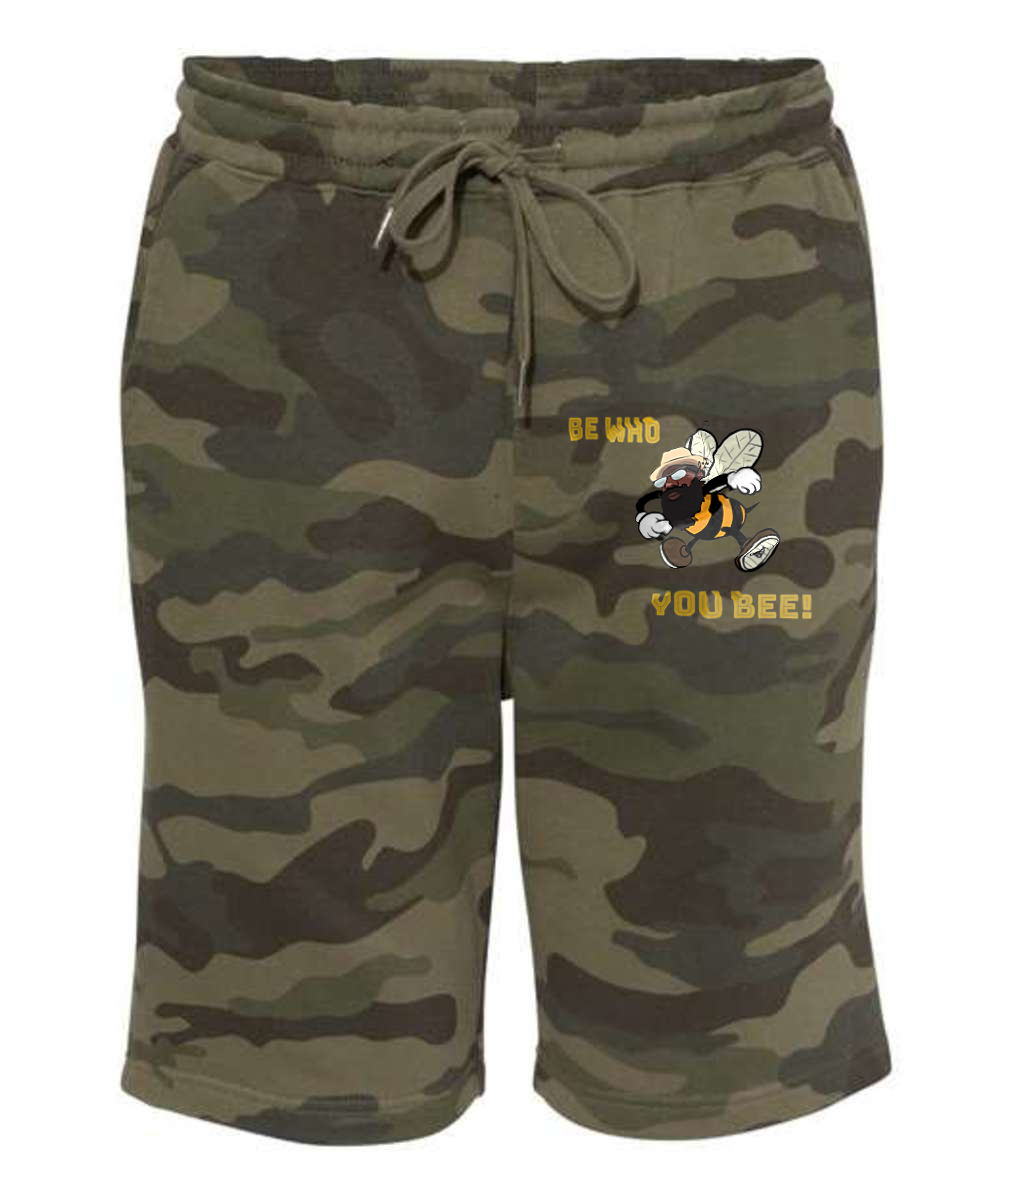 Be Who You Bee  - Midweight Fleece Shorts or Similar